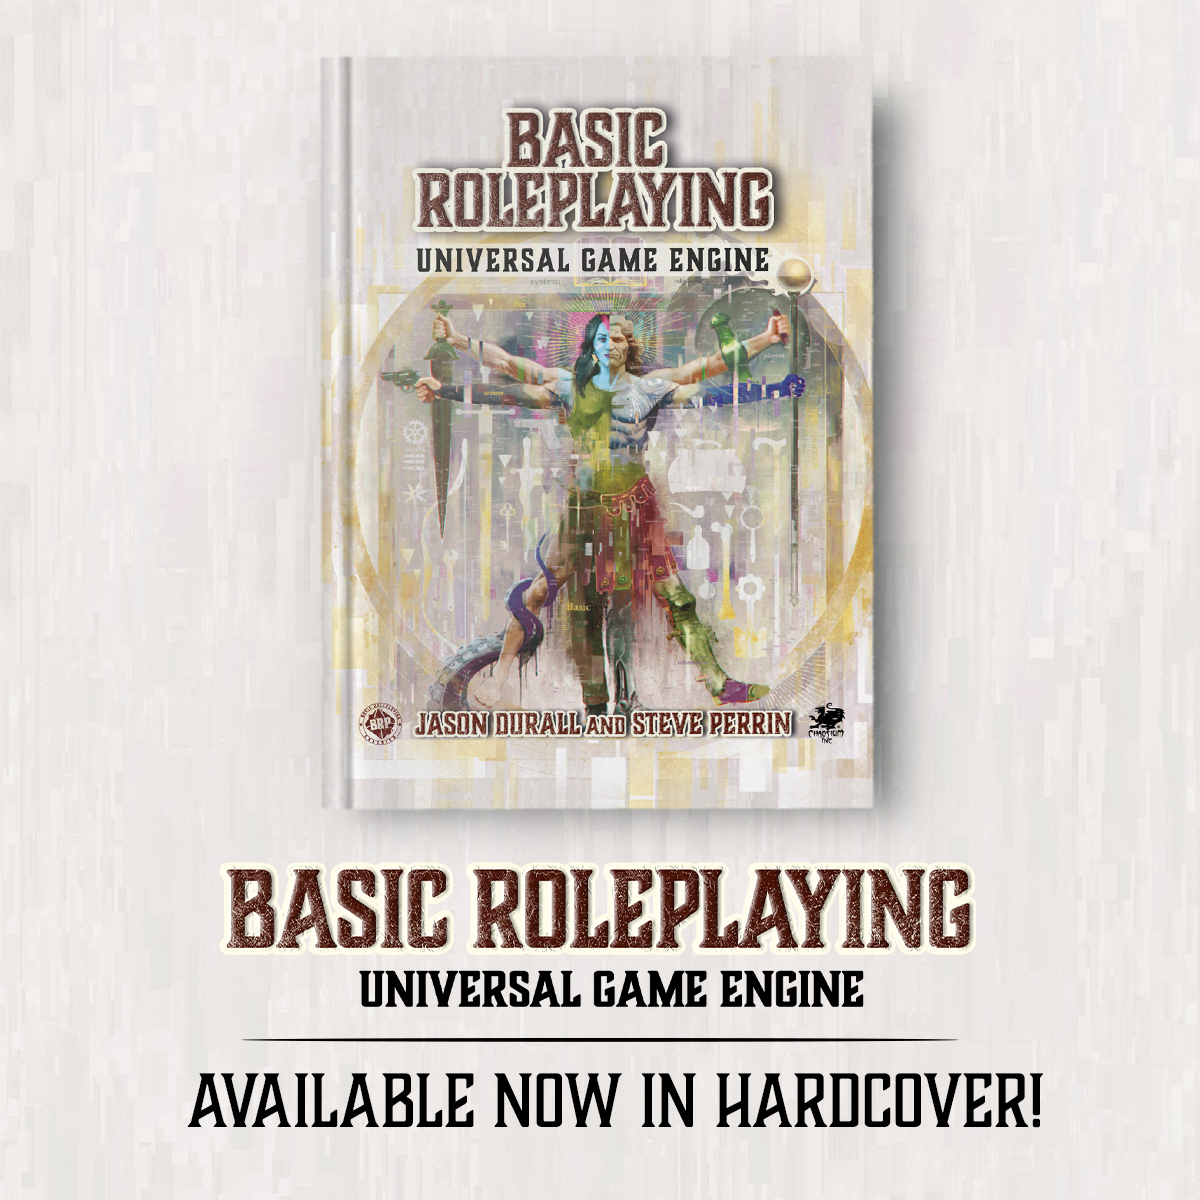 [RPGnet] Basic Roleplaying: Universal Game Engine is out now in hardback: {filename}.{extension}